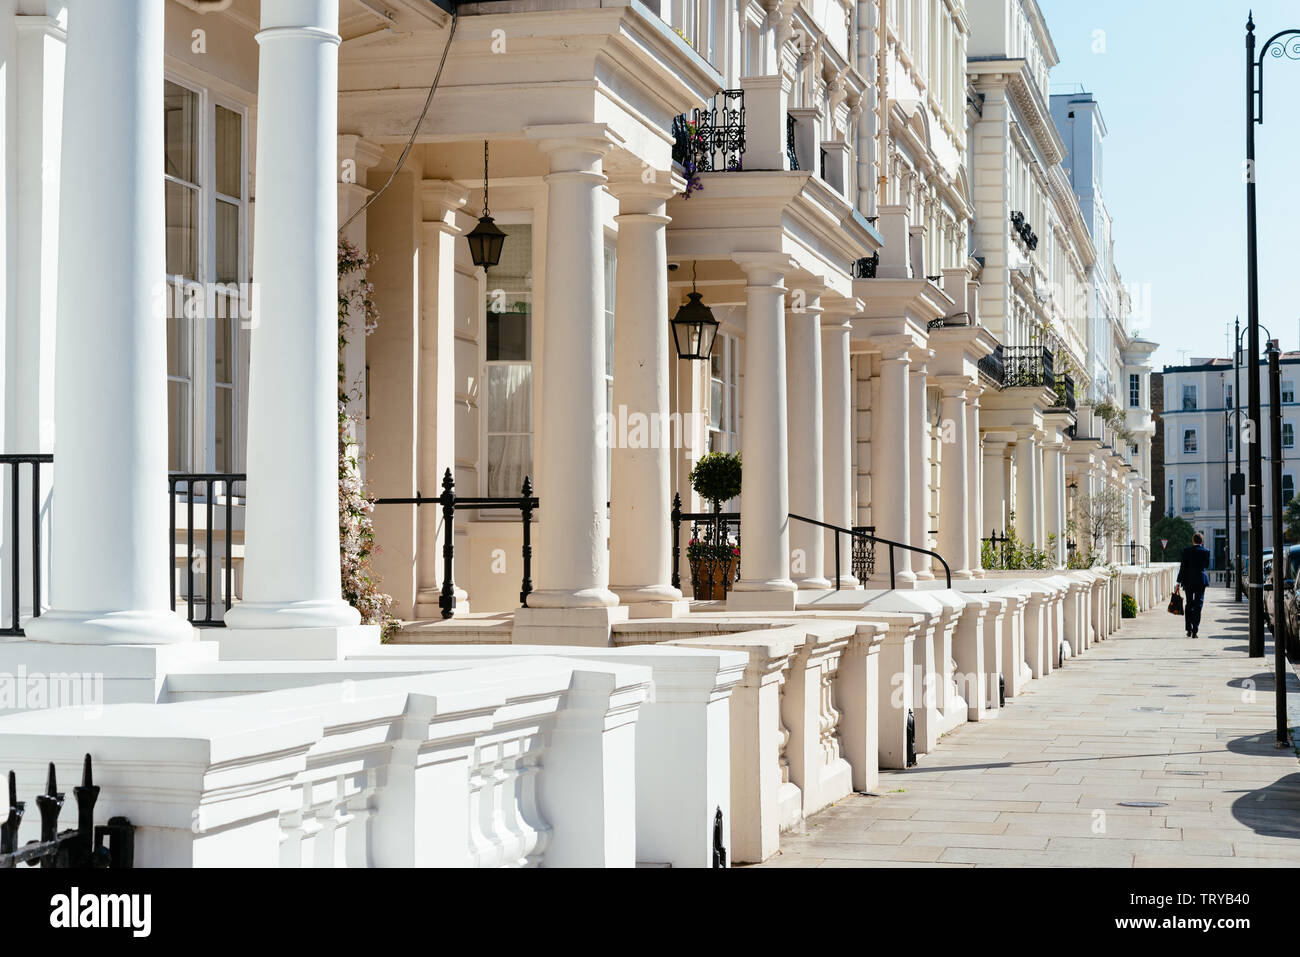 Residential townhouses and pedestrian walkway in Notting Hill, London England, UK Stock Photo